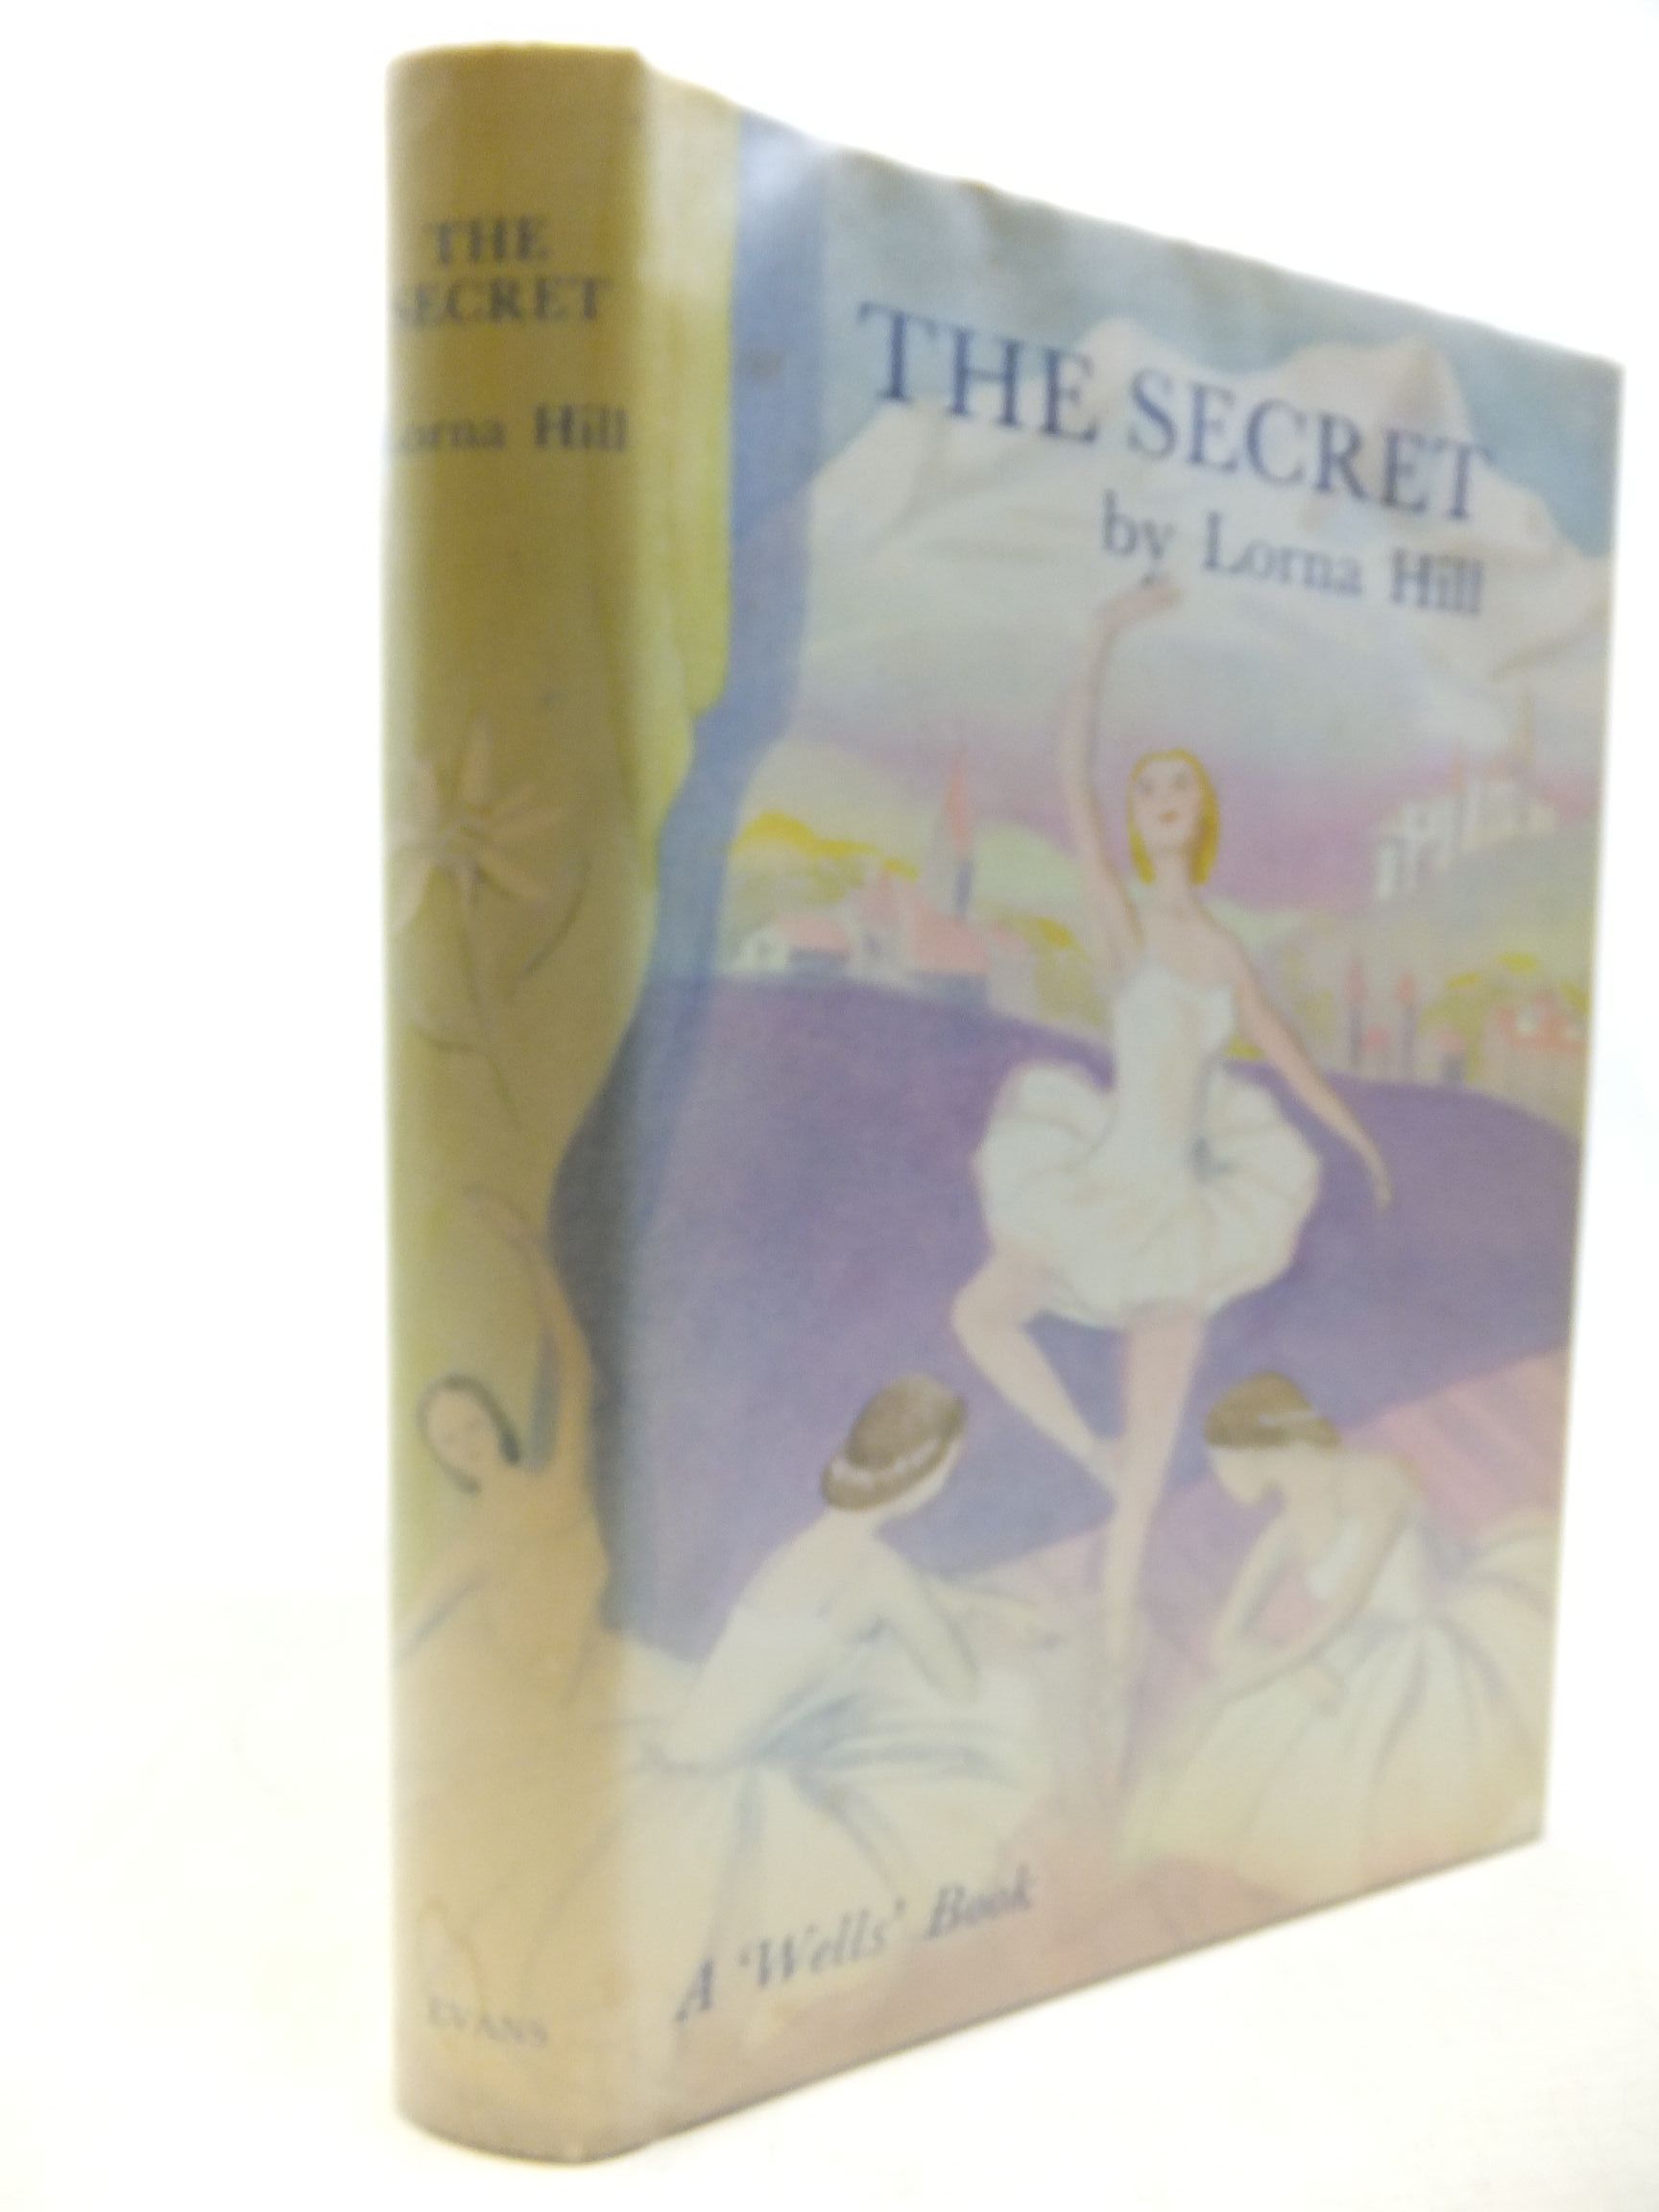 Cover of THE SECRET by Lorna Hill